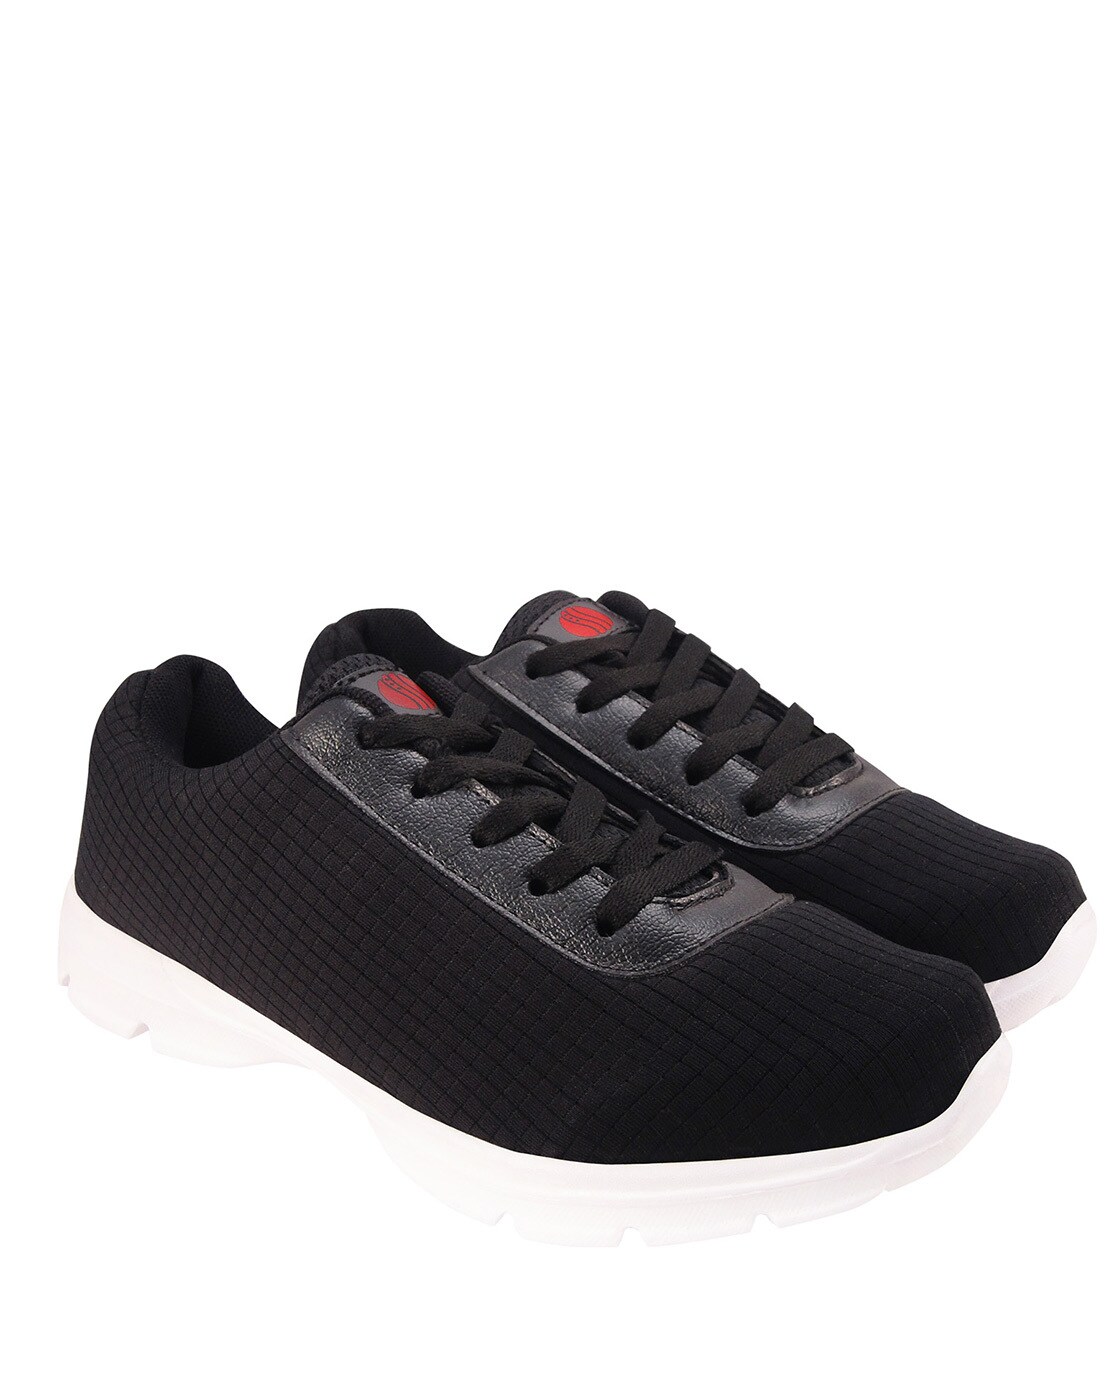 action sports shoes for womens